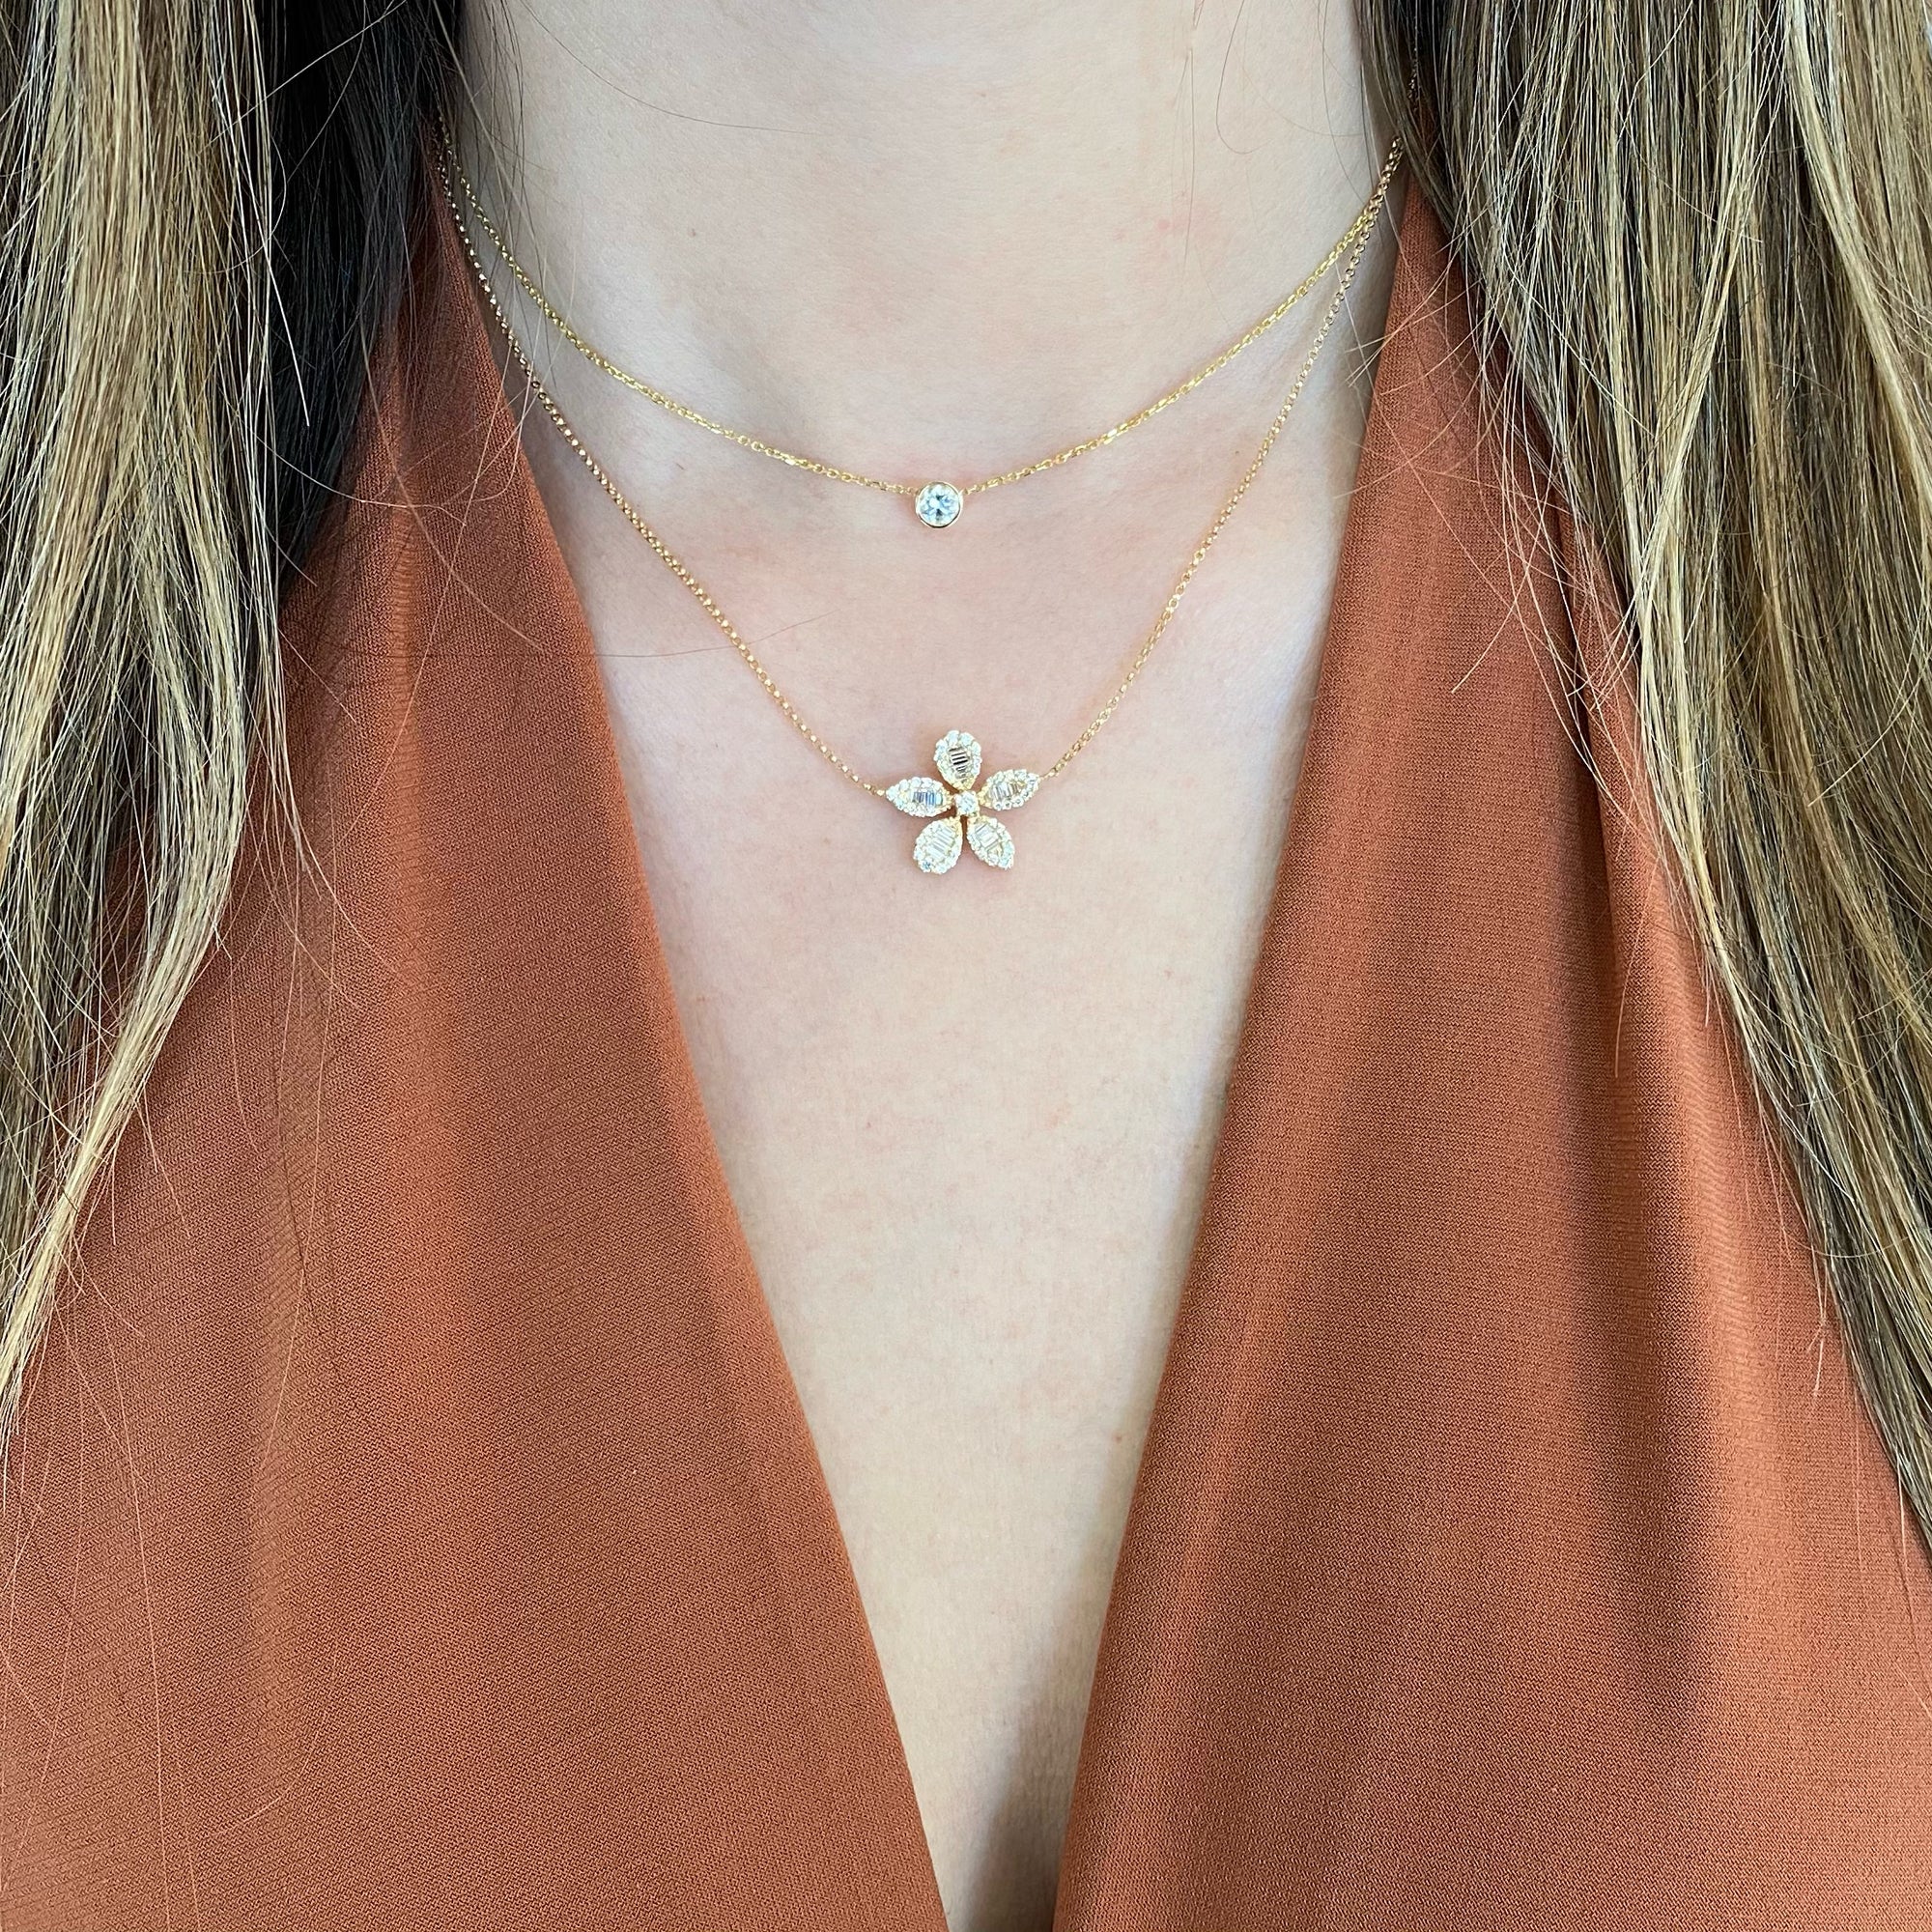 Baguette Diamond Flower Necklace - 14K yellow gold weighing 3.45 grams - 20 slim baguettes totaling 0.29 carats - 46 round diamonds totaling 0.38 carats